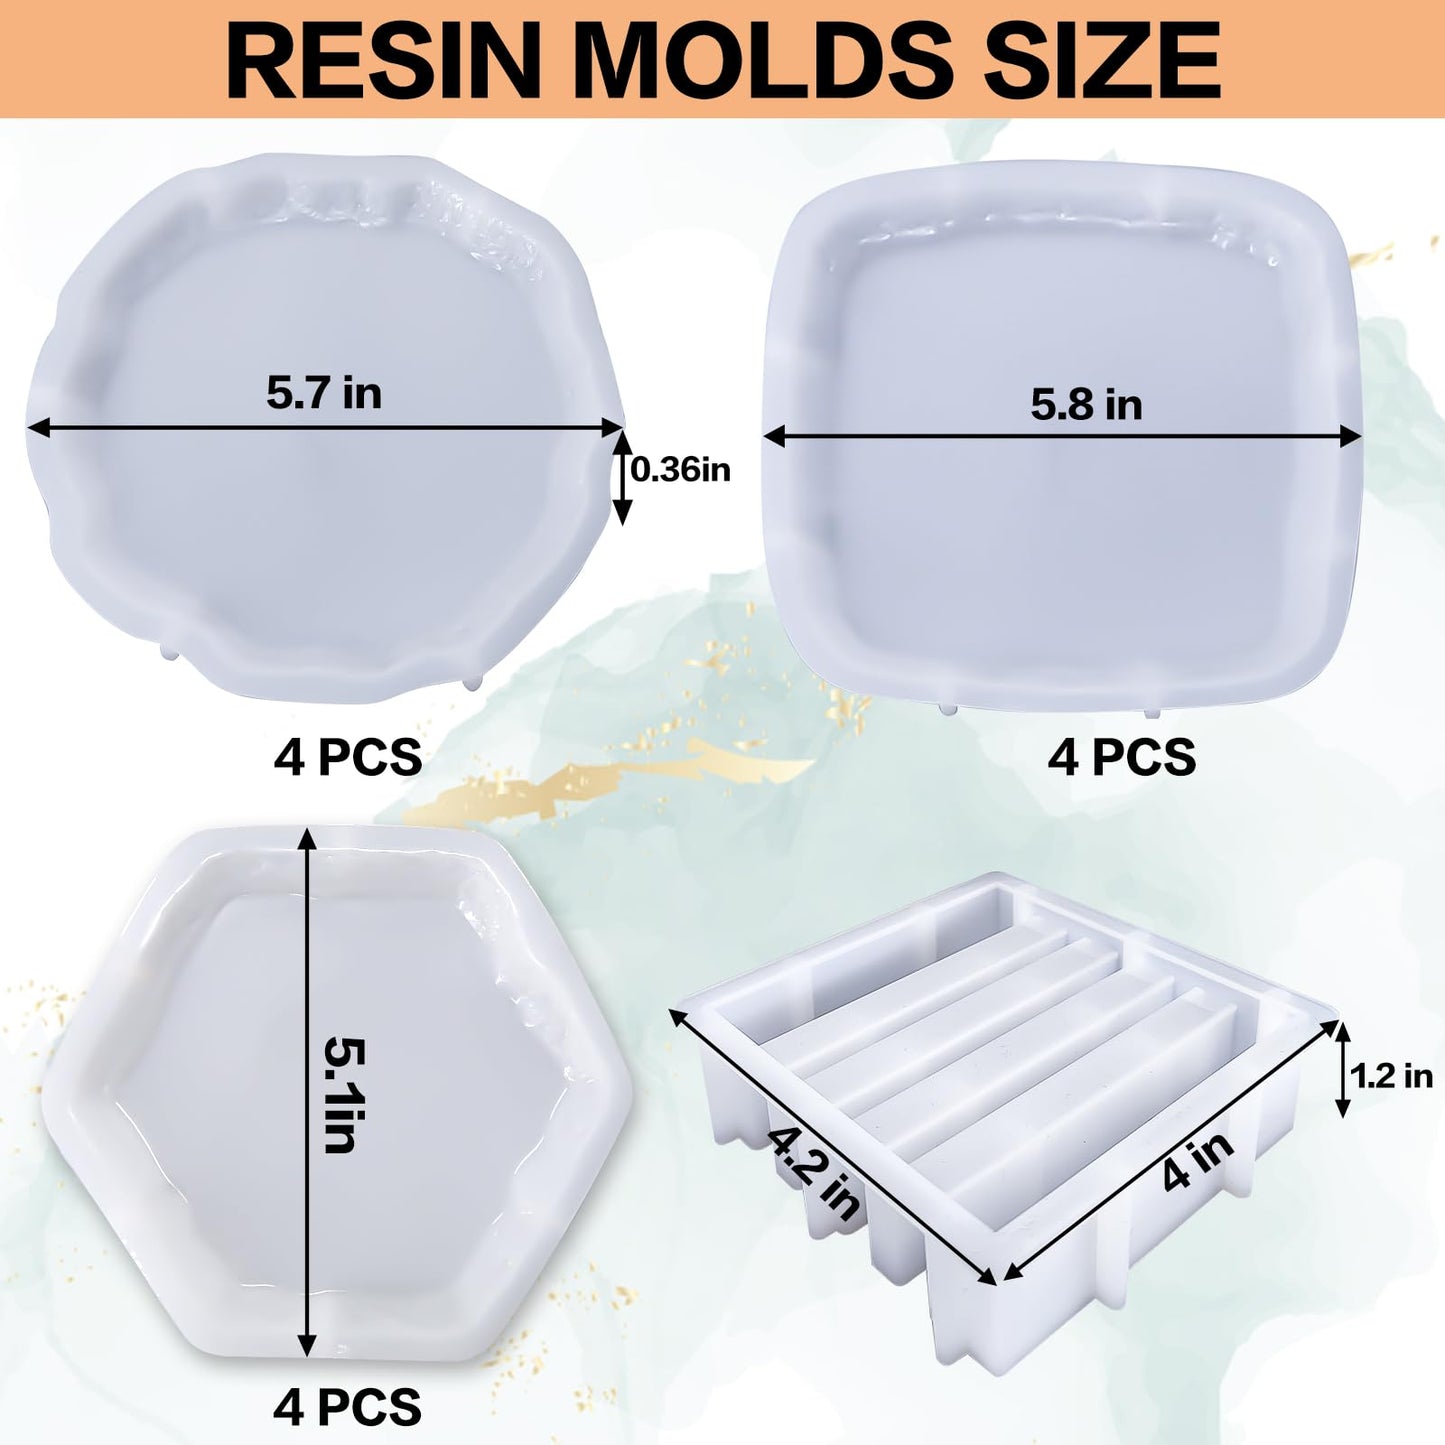 13 Pcs Resin Coaster Molds Set,5.7Inch Silicone Coaster Molds for Epoxy Resin,Round Square Hexagon Coaster Mold with Holder,DIY Custom Coaster Resin